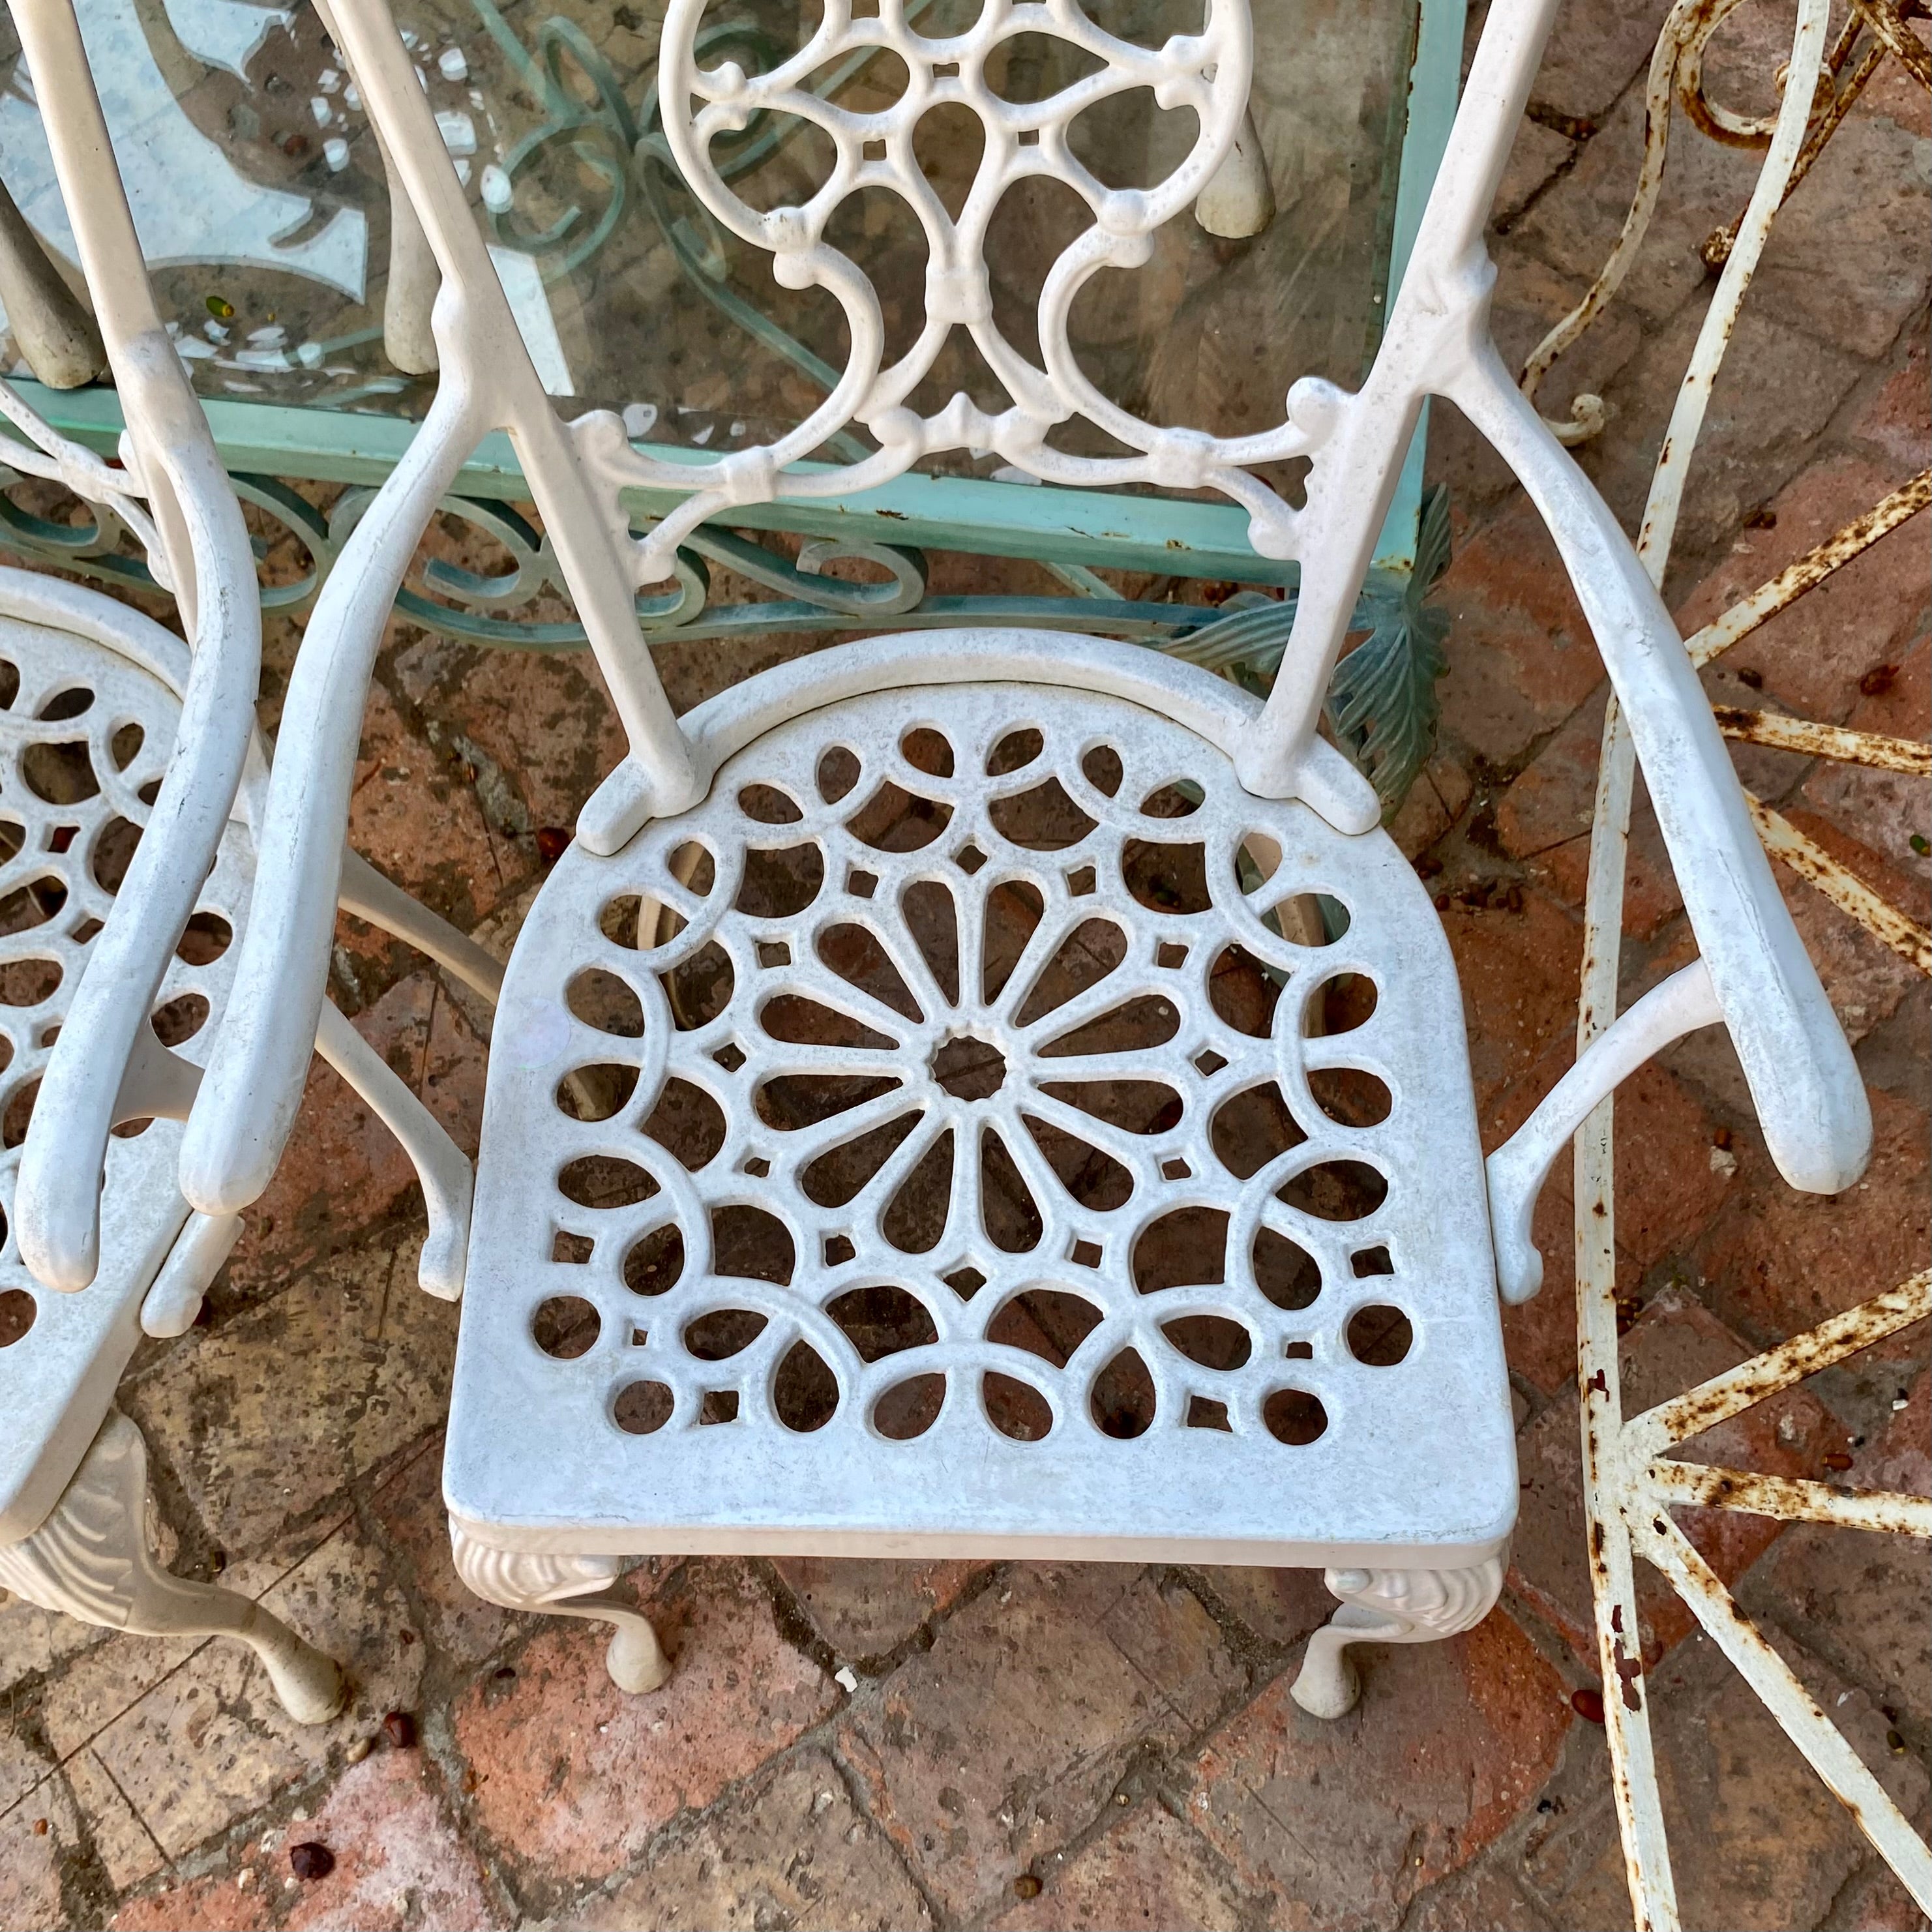 Set of French Cast Iron Dining Chairs